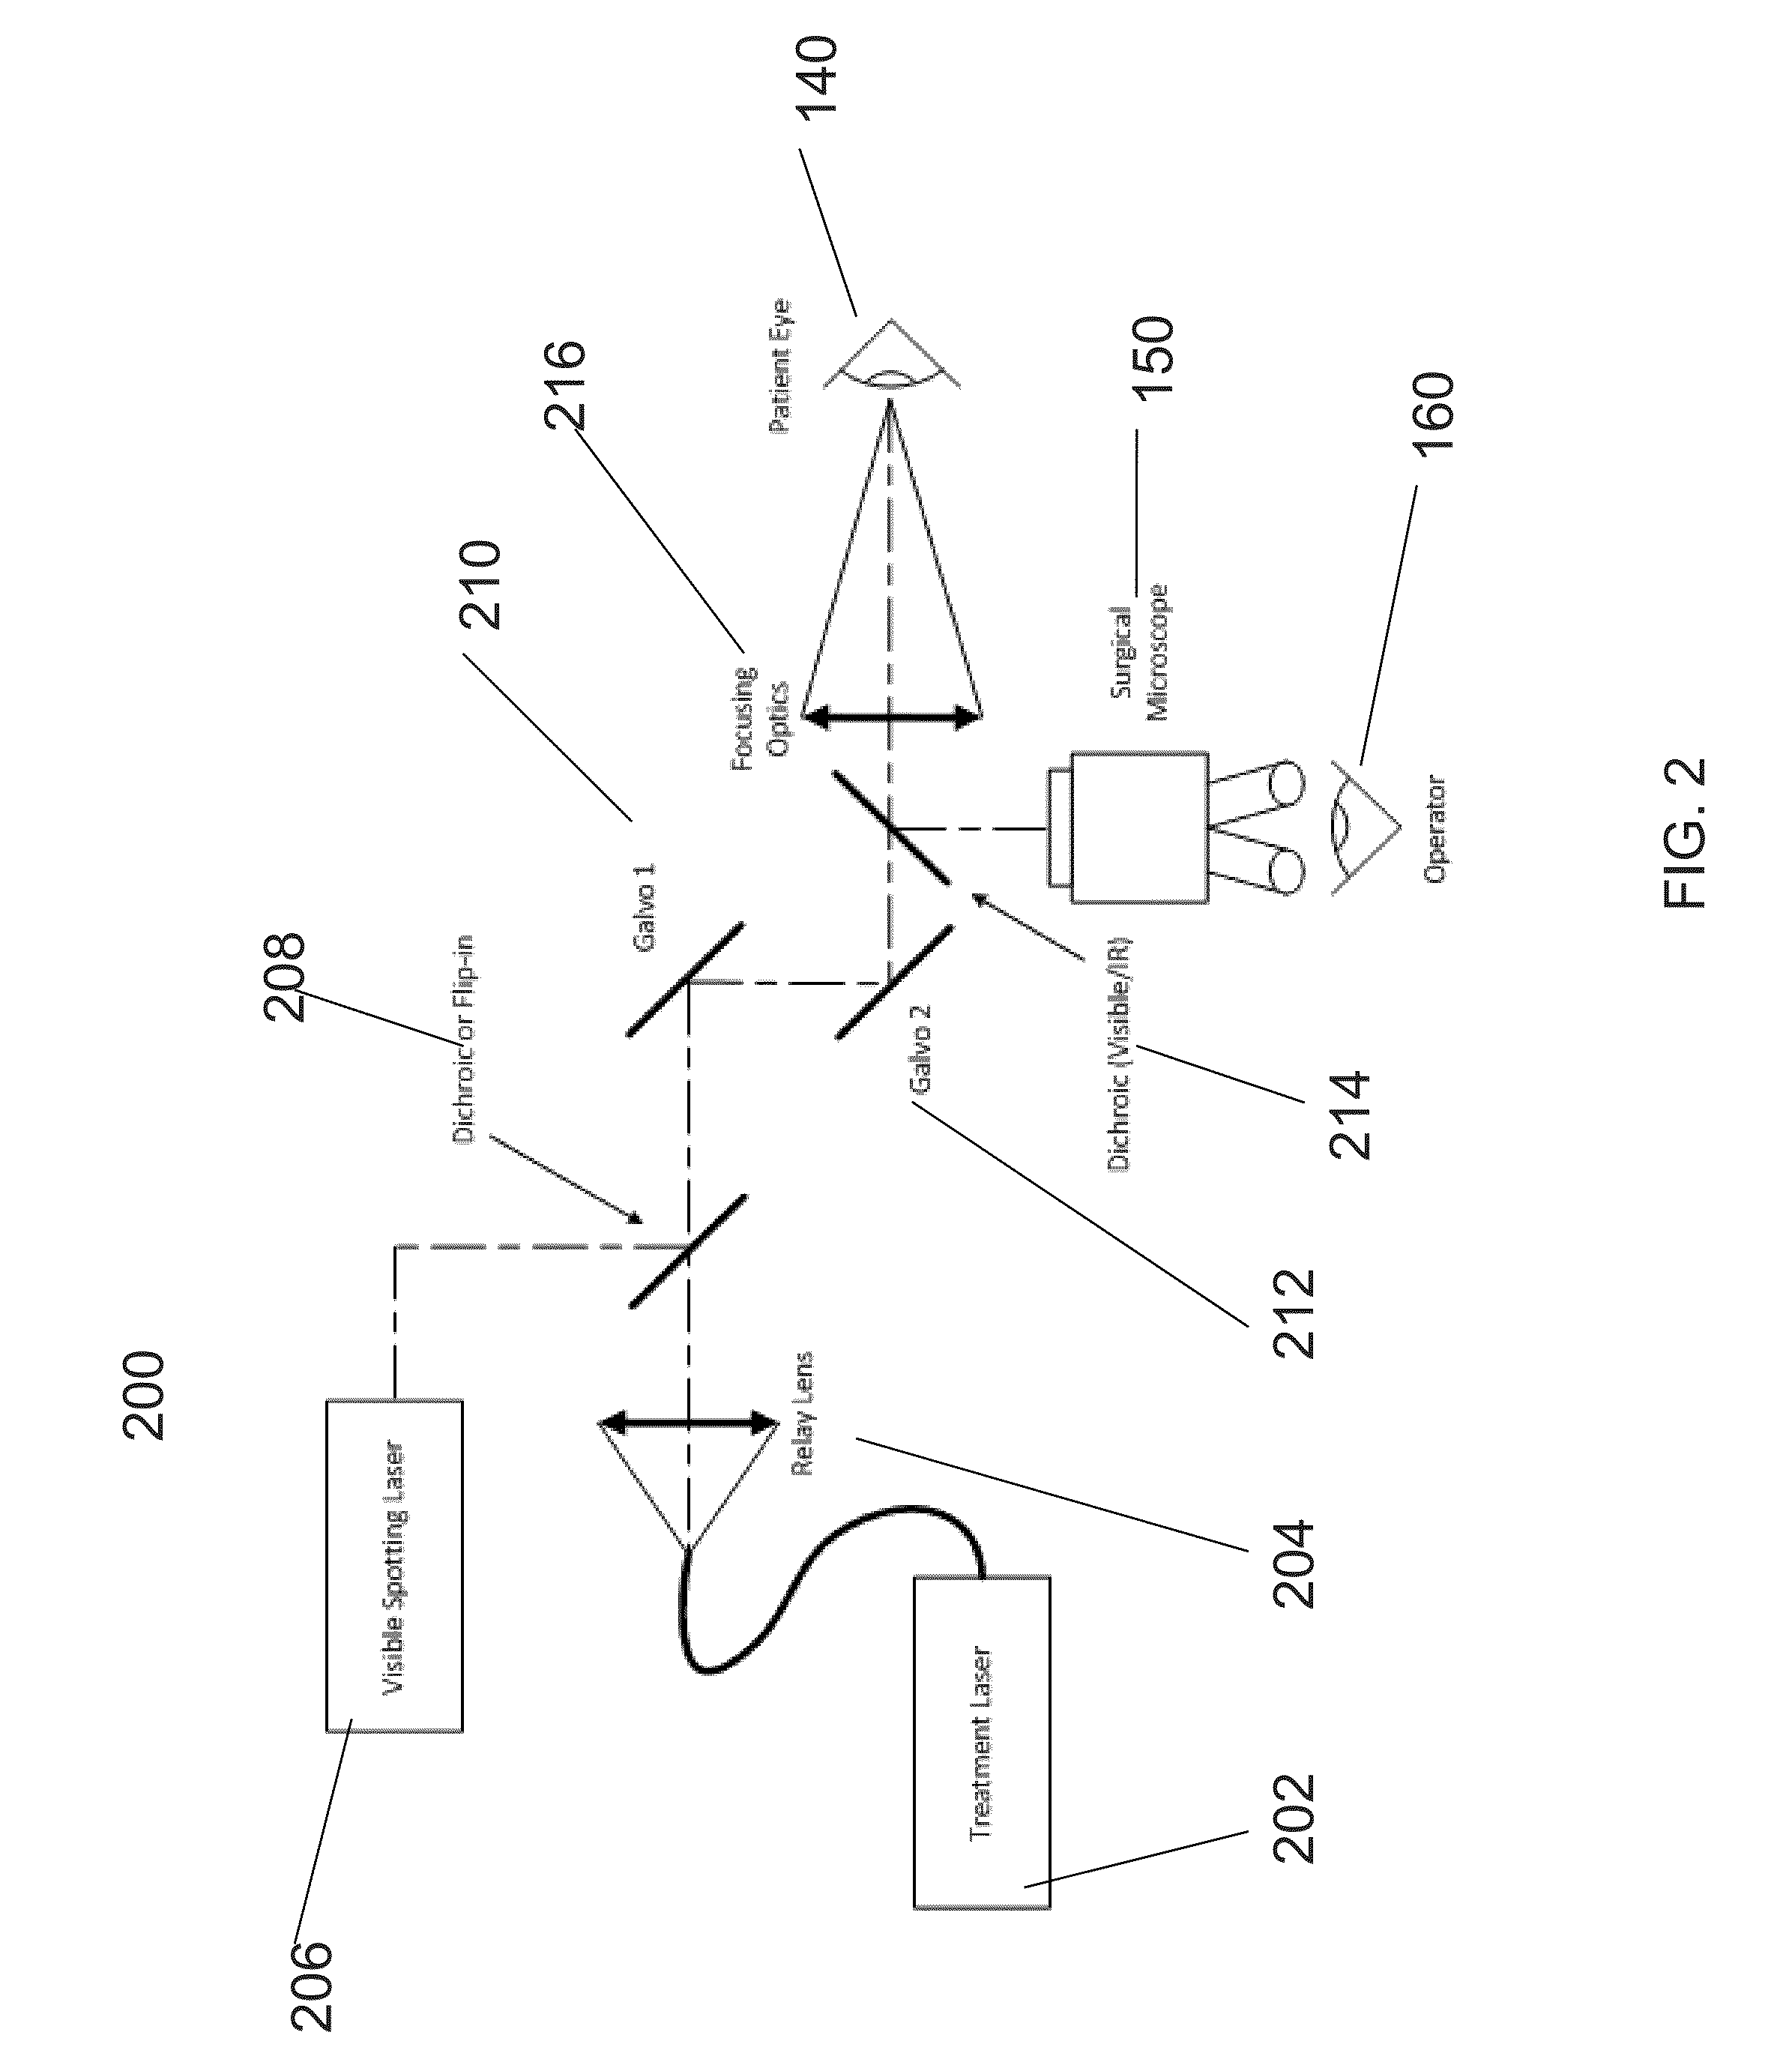 Systems and methods for affecting the biomechanical properties of connective tissue